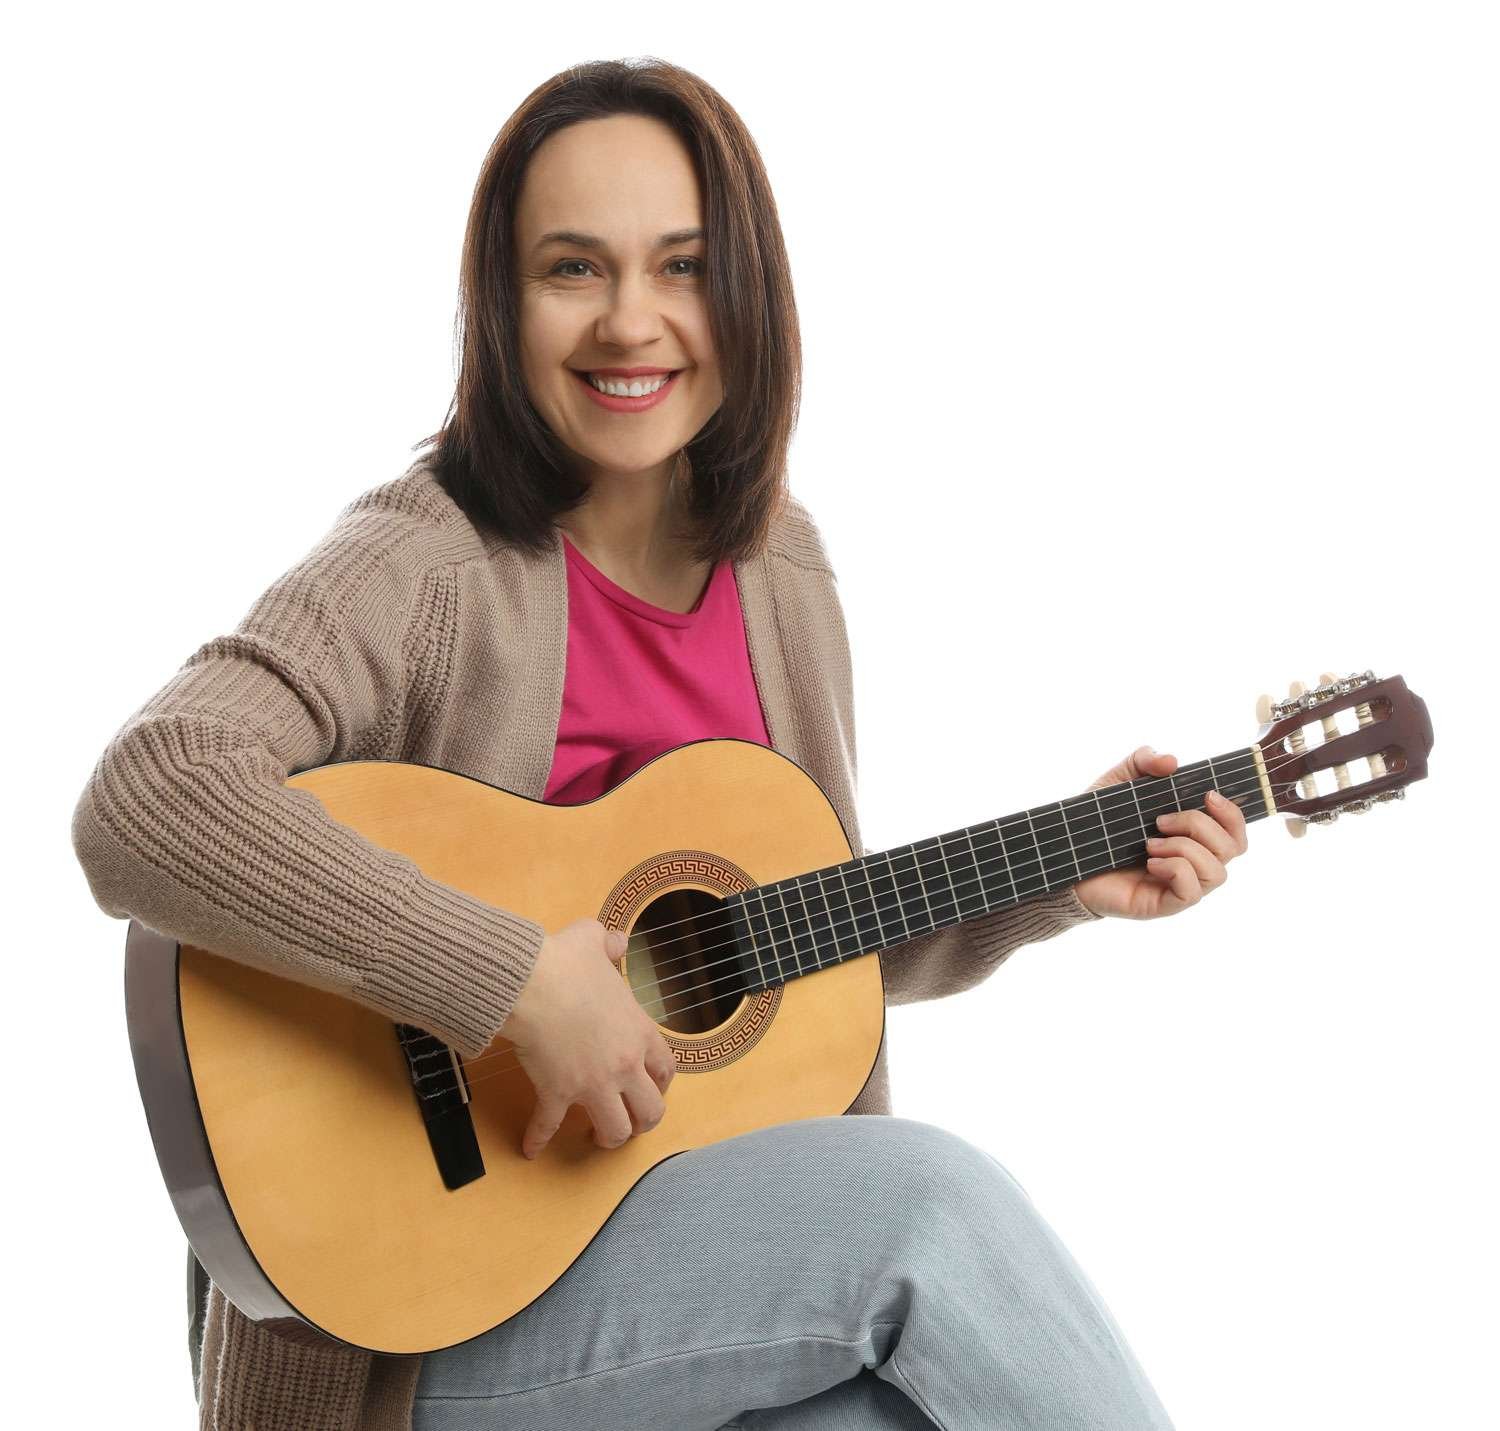 guitar teacher holding her guitar while smiling at the camera